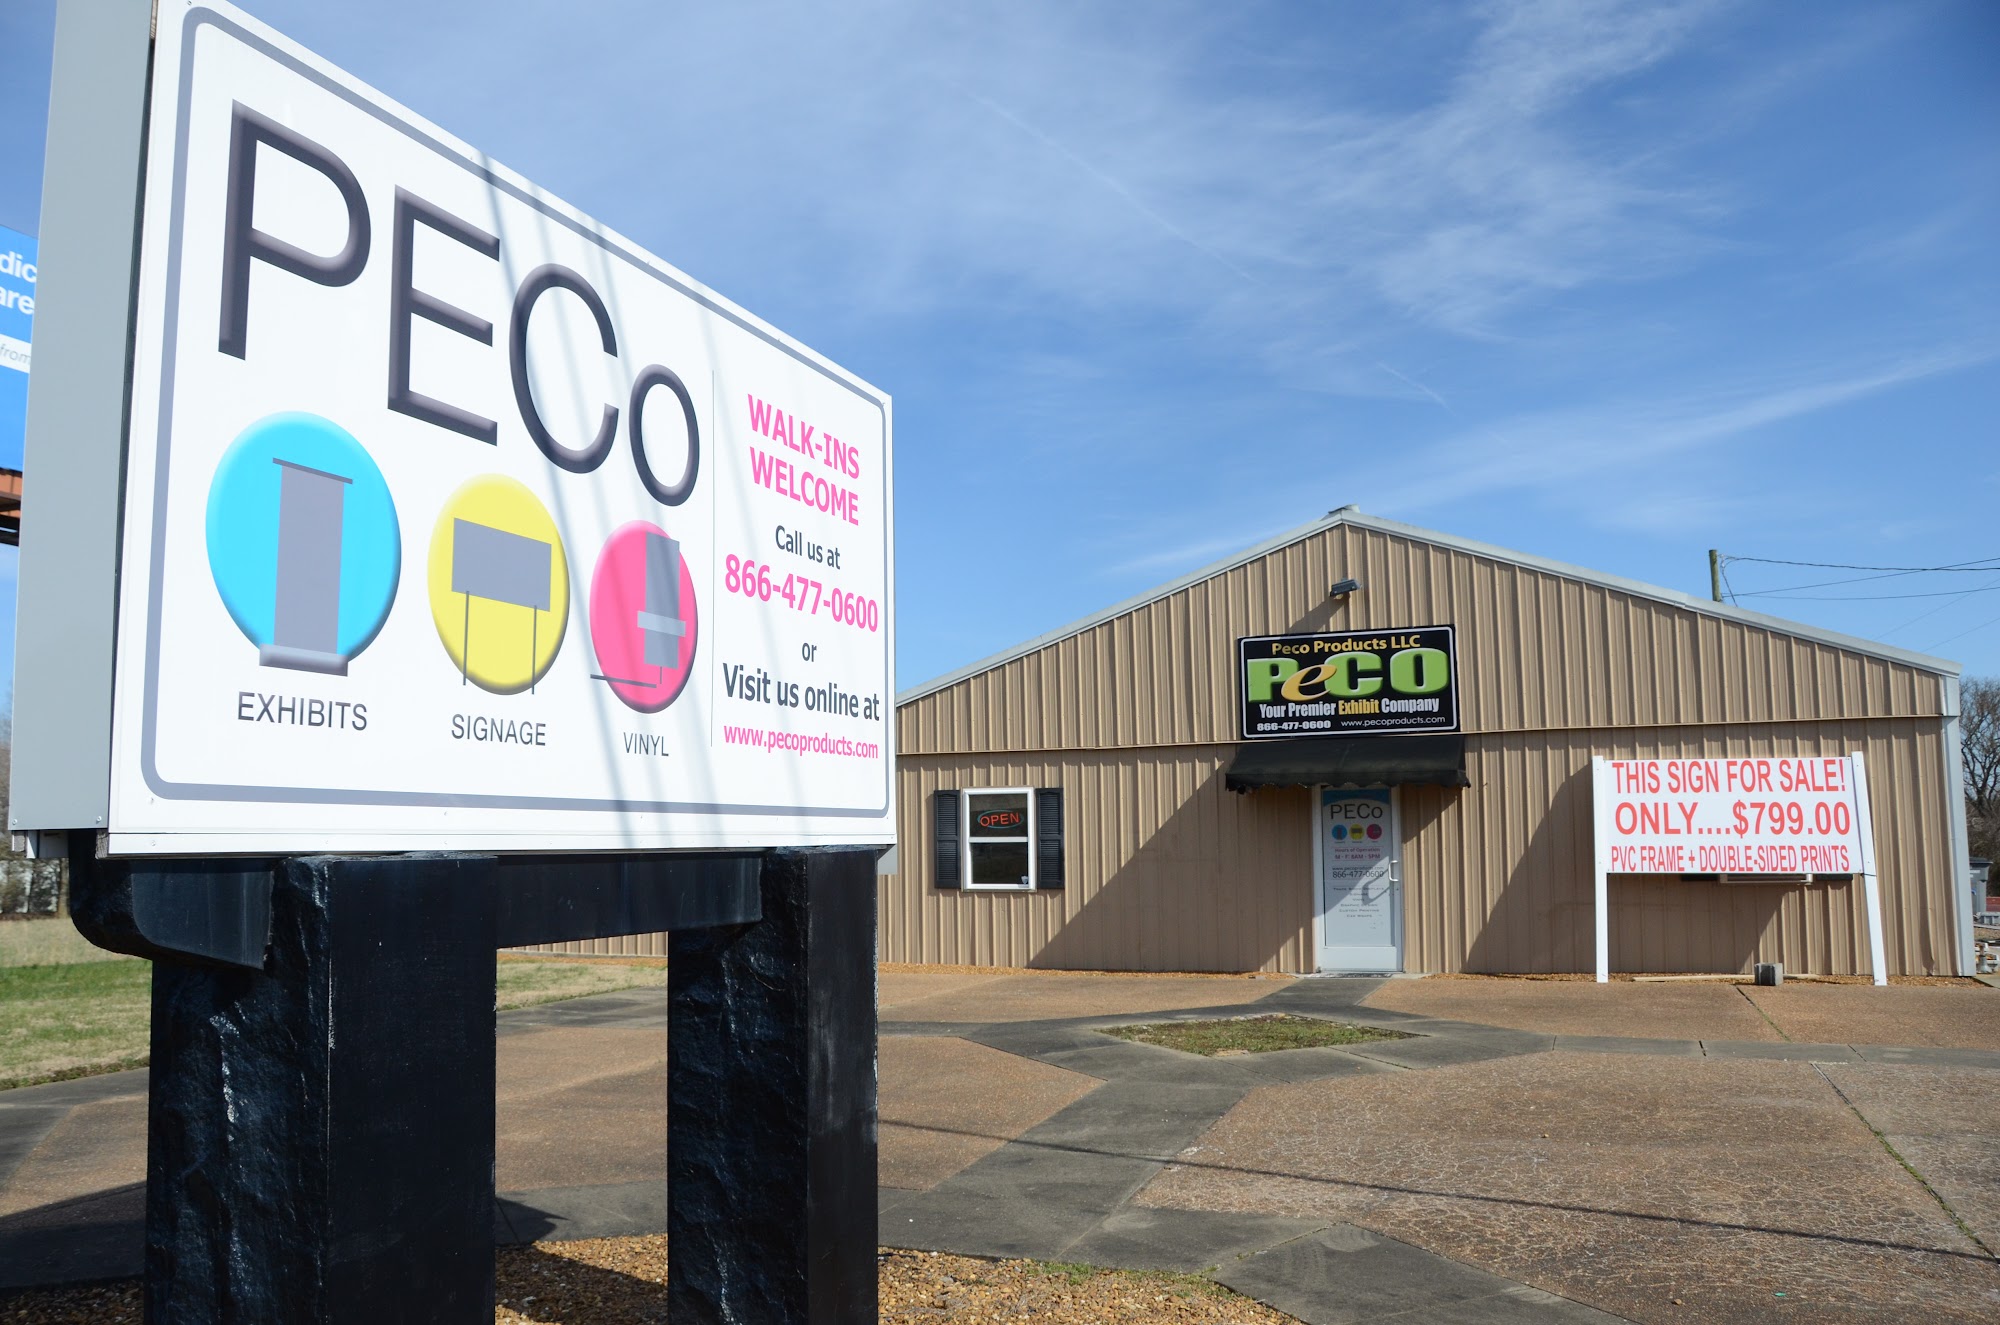 PeCo Signs and Wraps